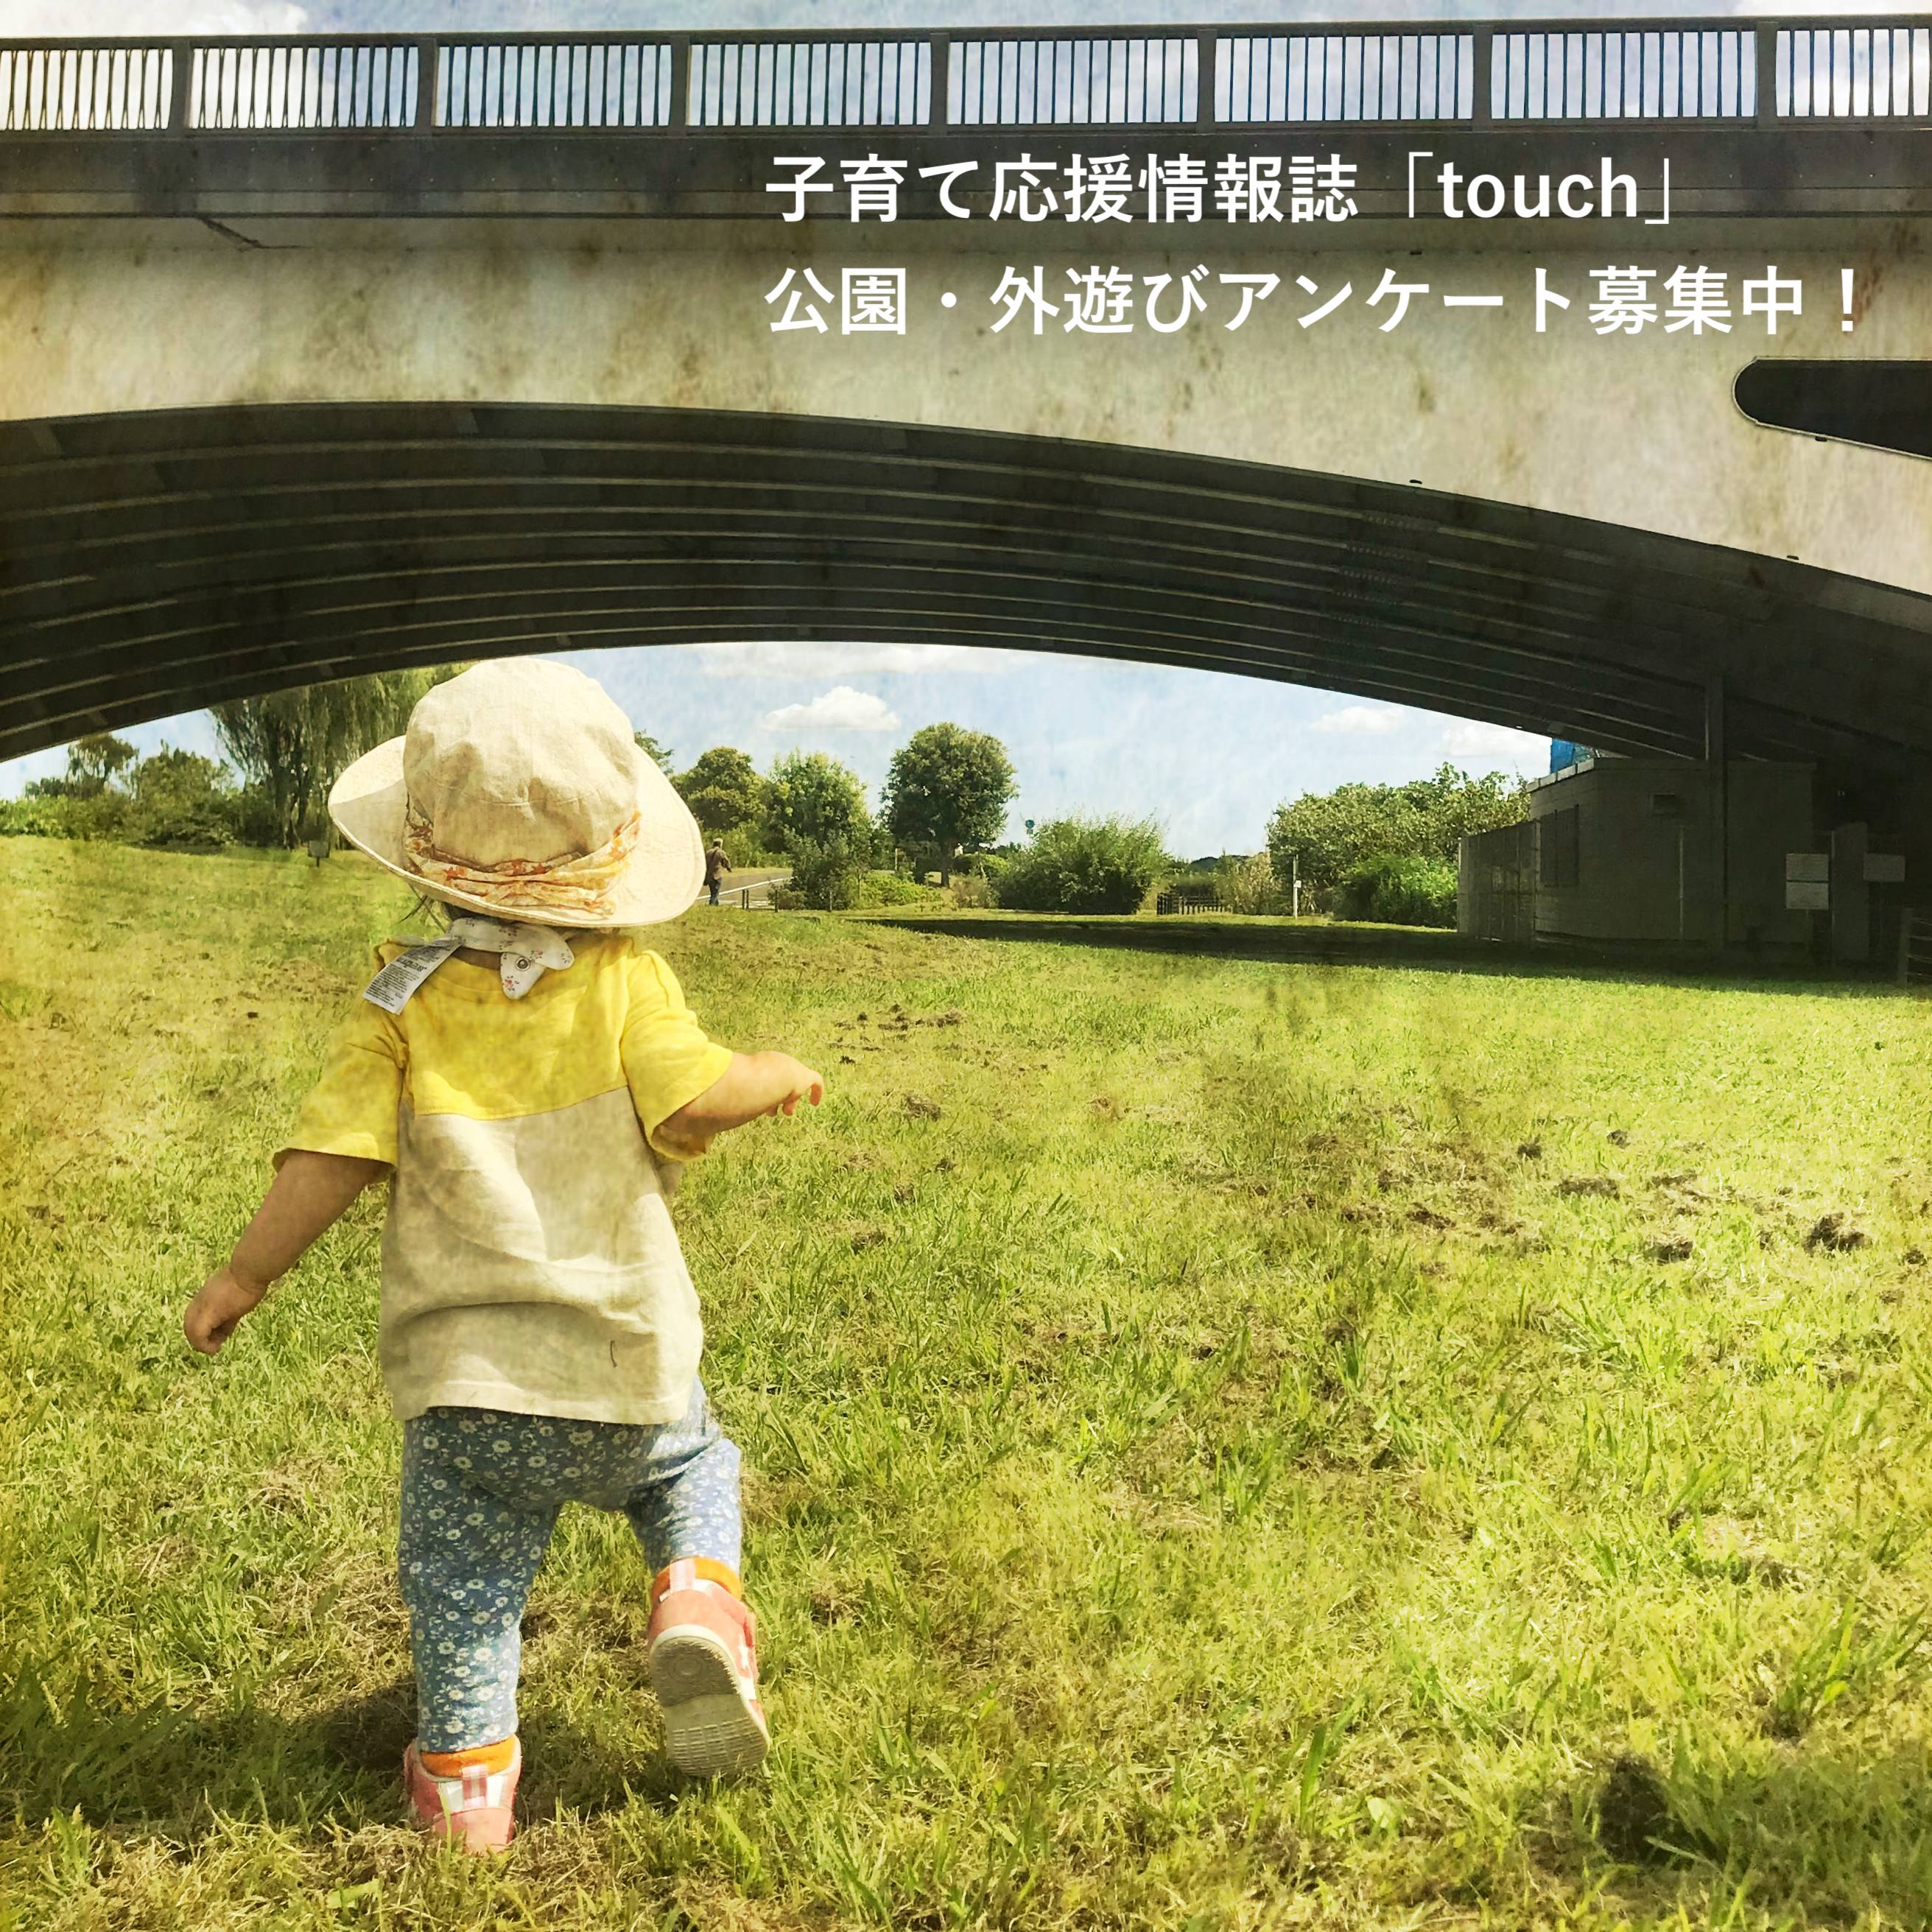 touchアンケート募集